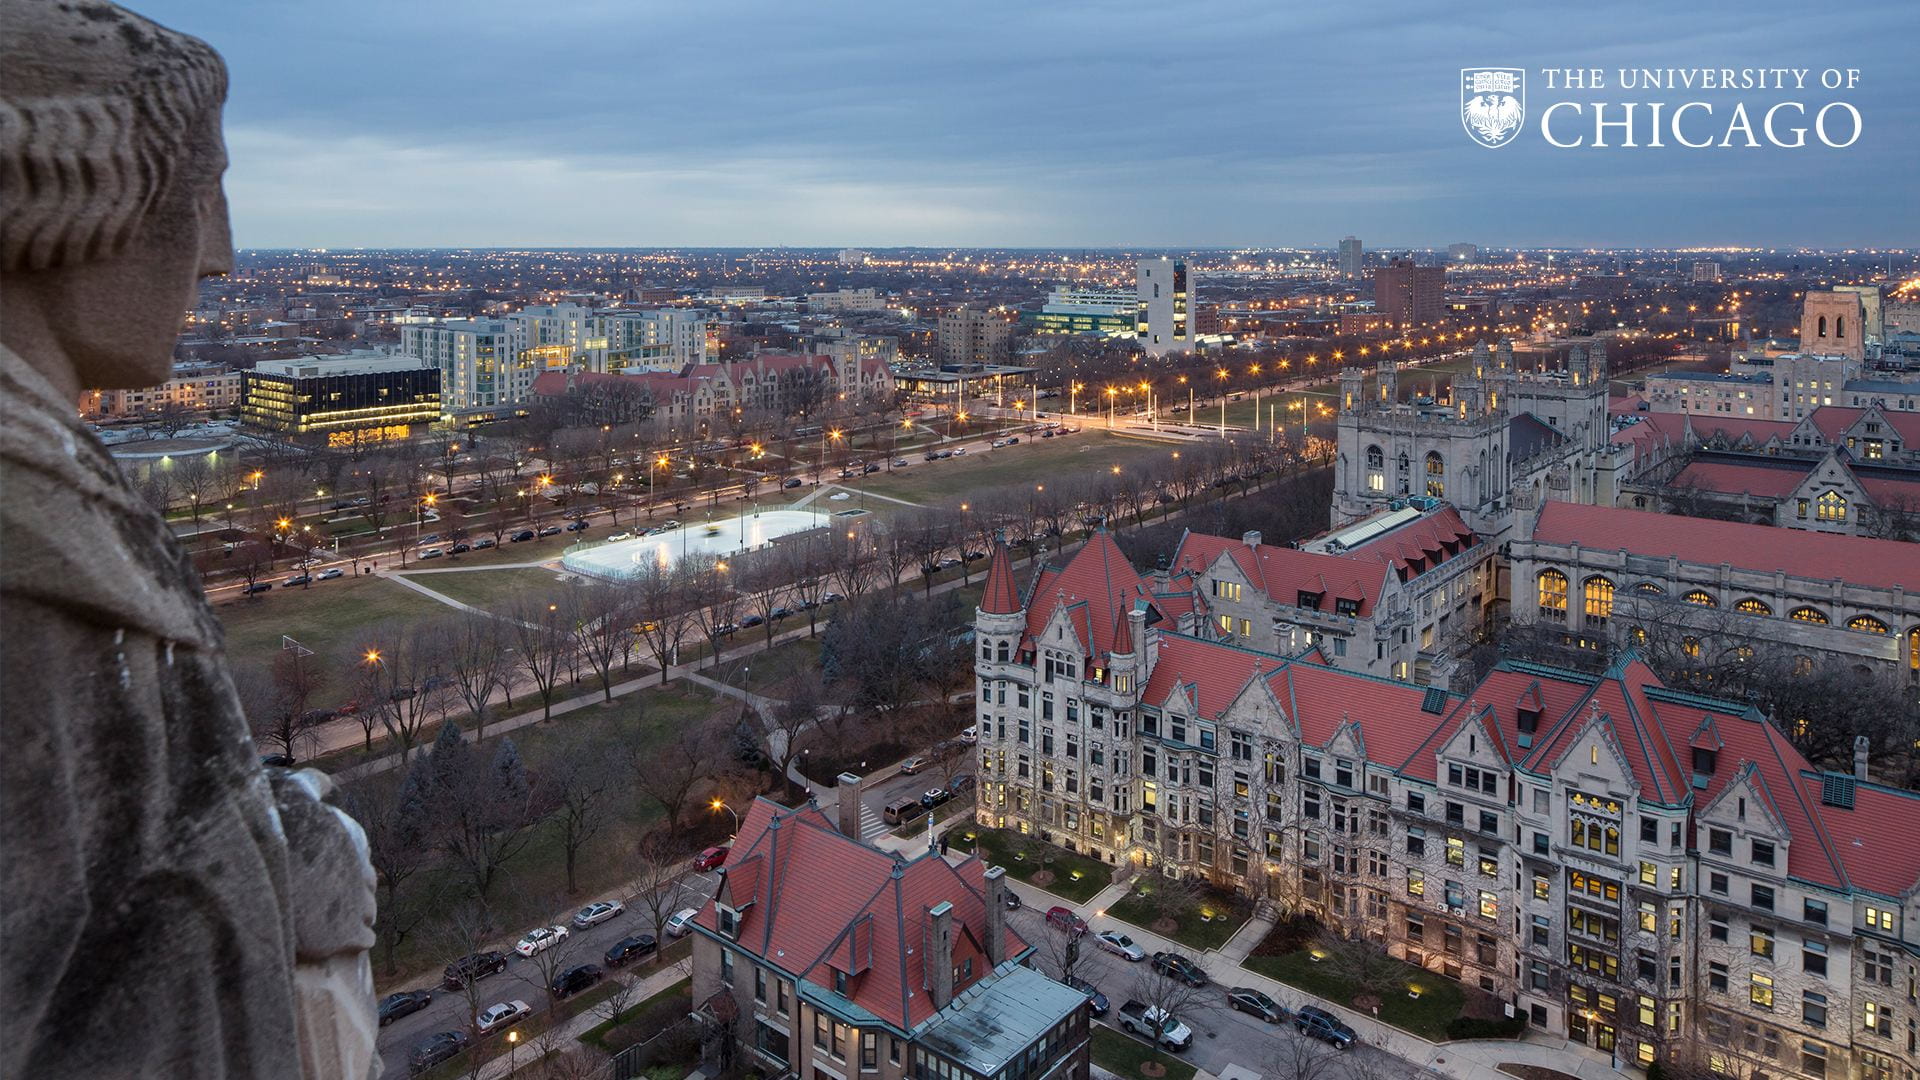 View from UChicago at dusk